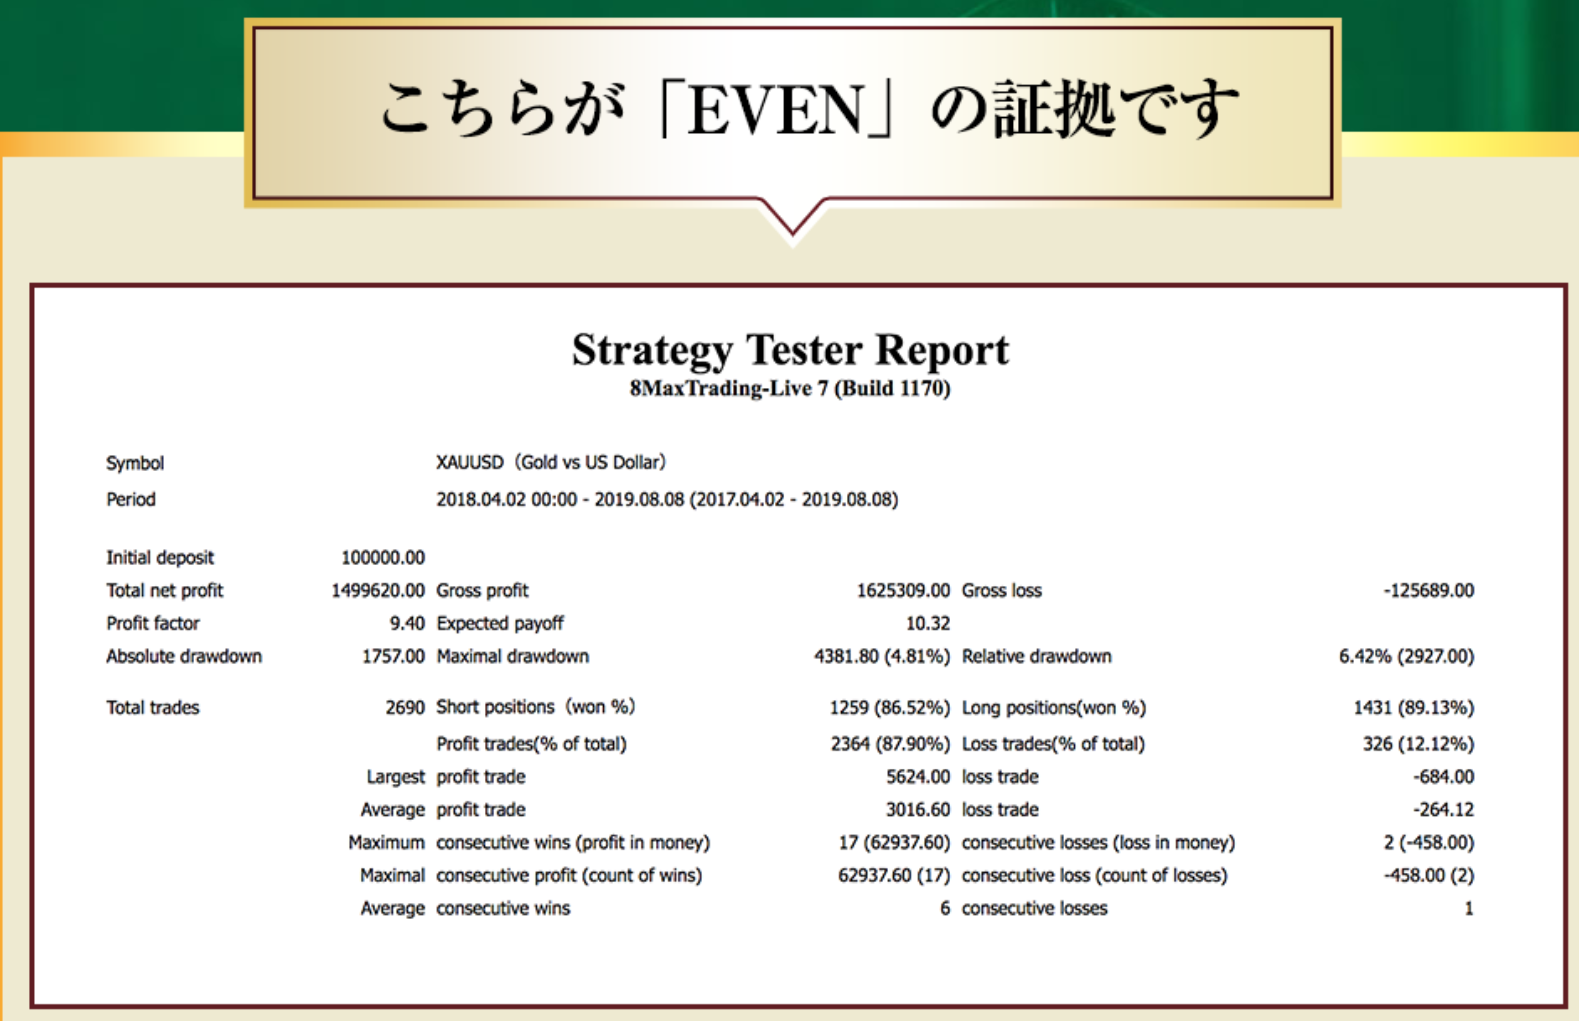 THE EVEN PROJECT 高橋瞳 data.png